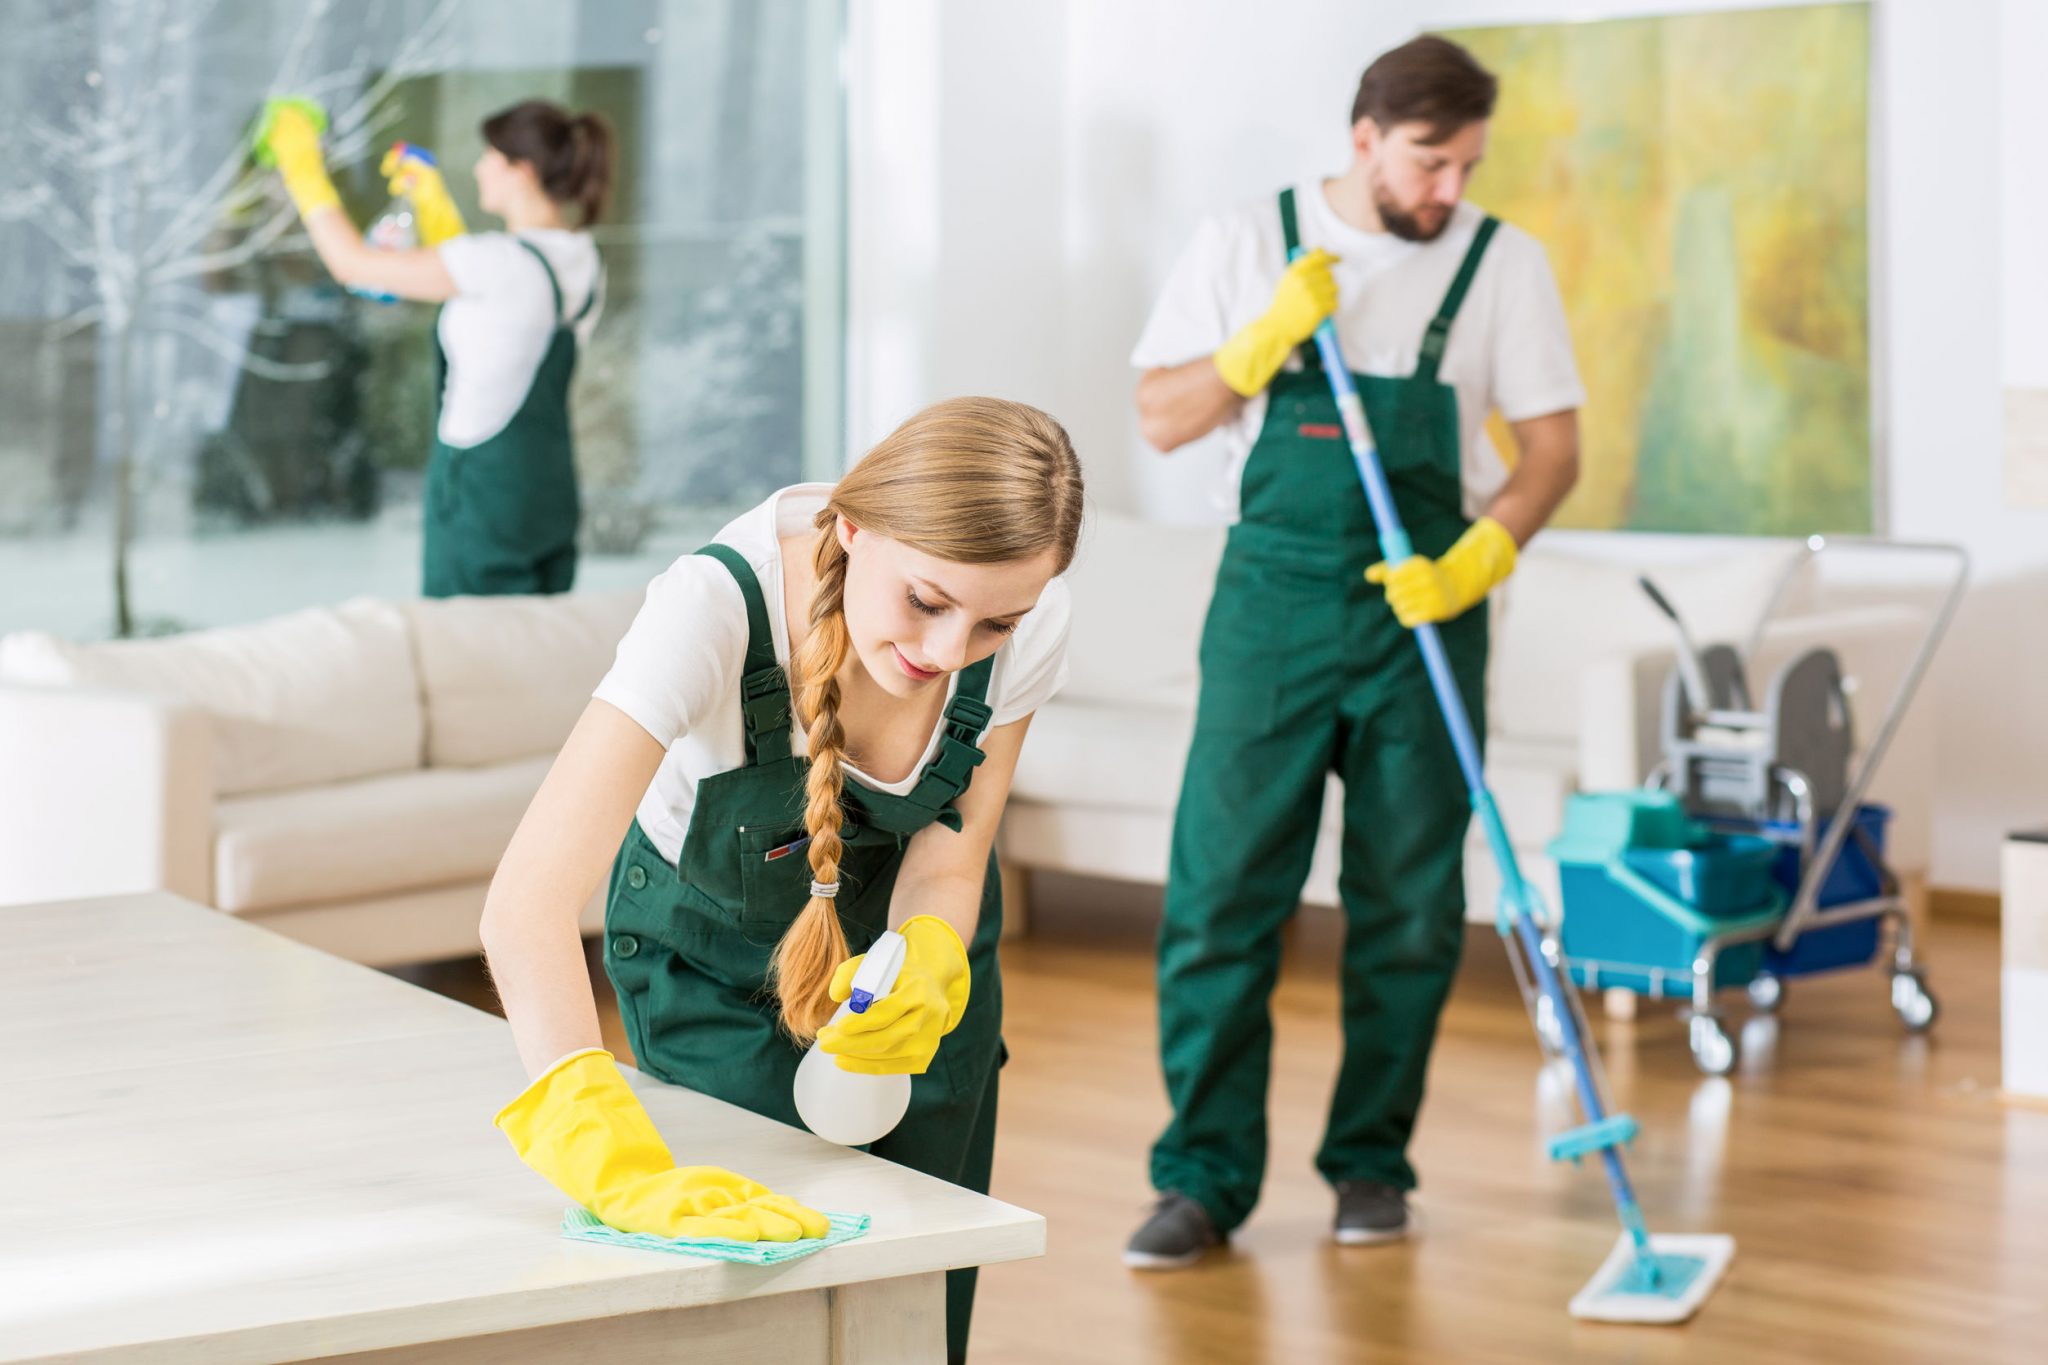 5 Reasons to Hire a House Cleaning Service During Covid-19